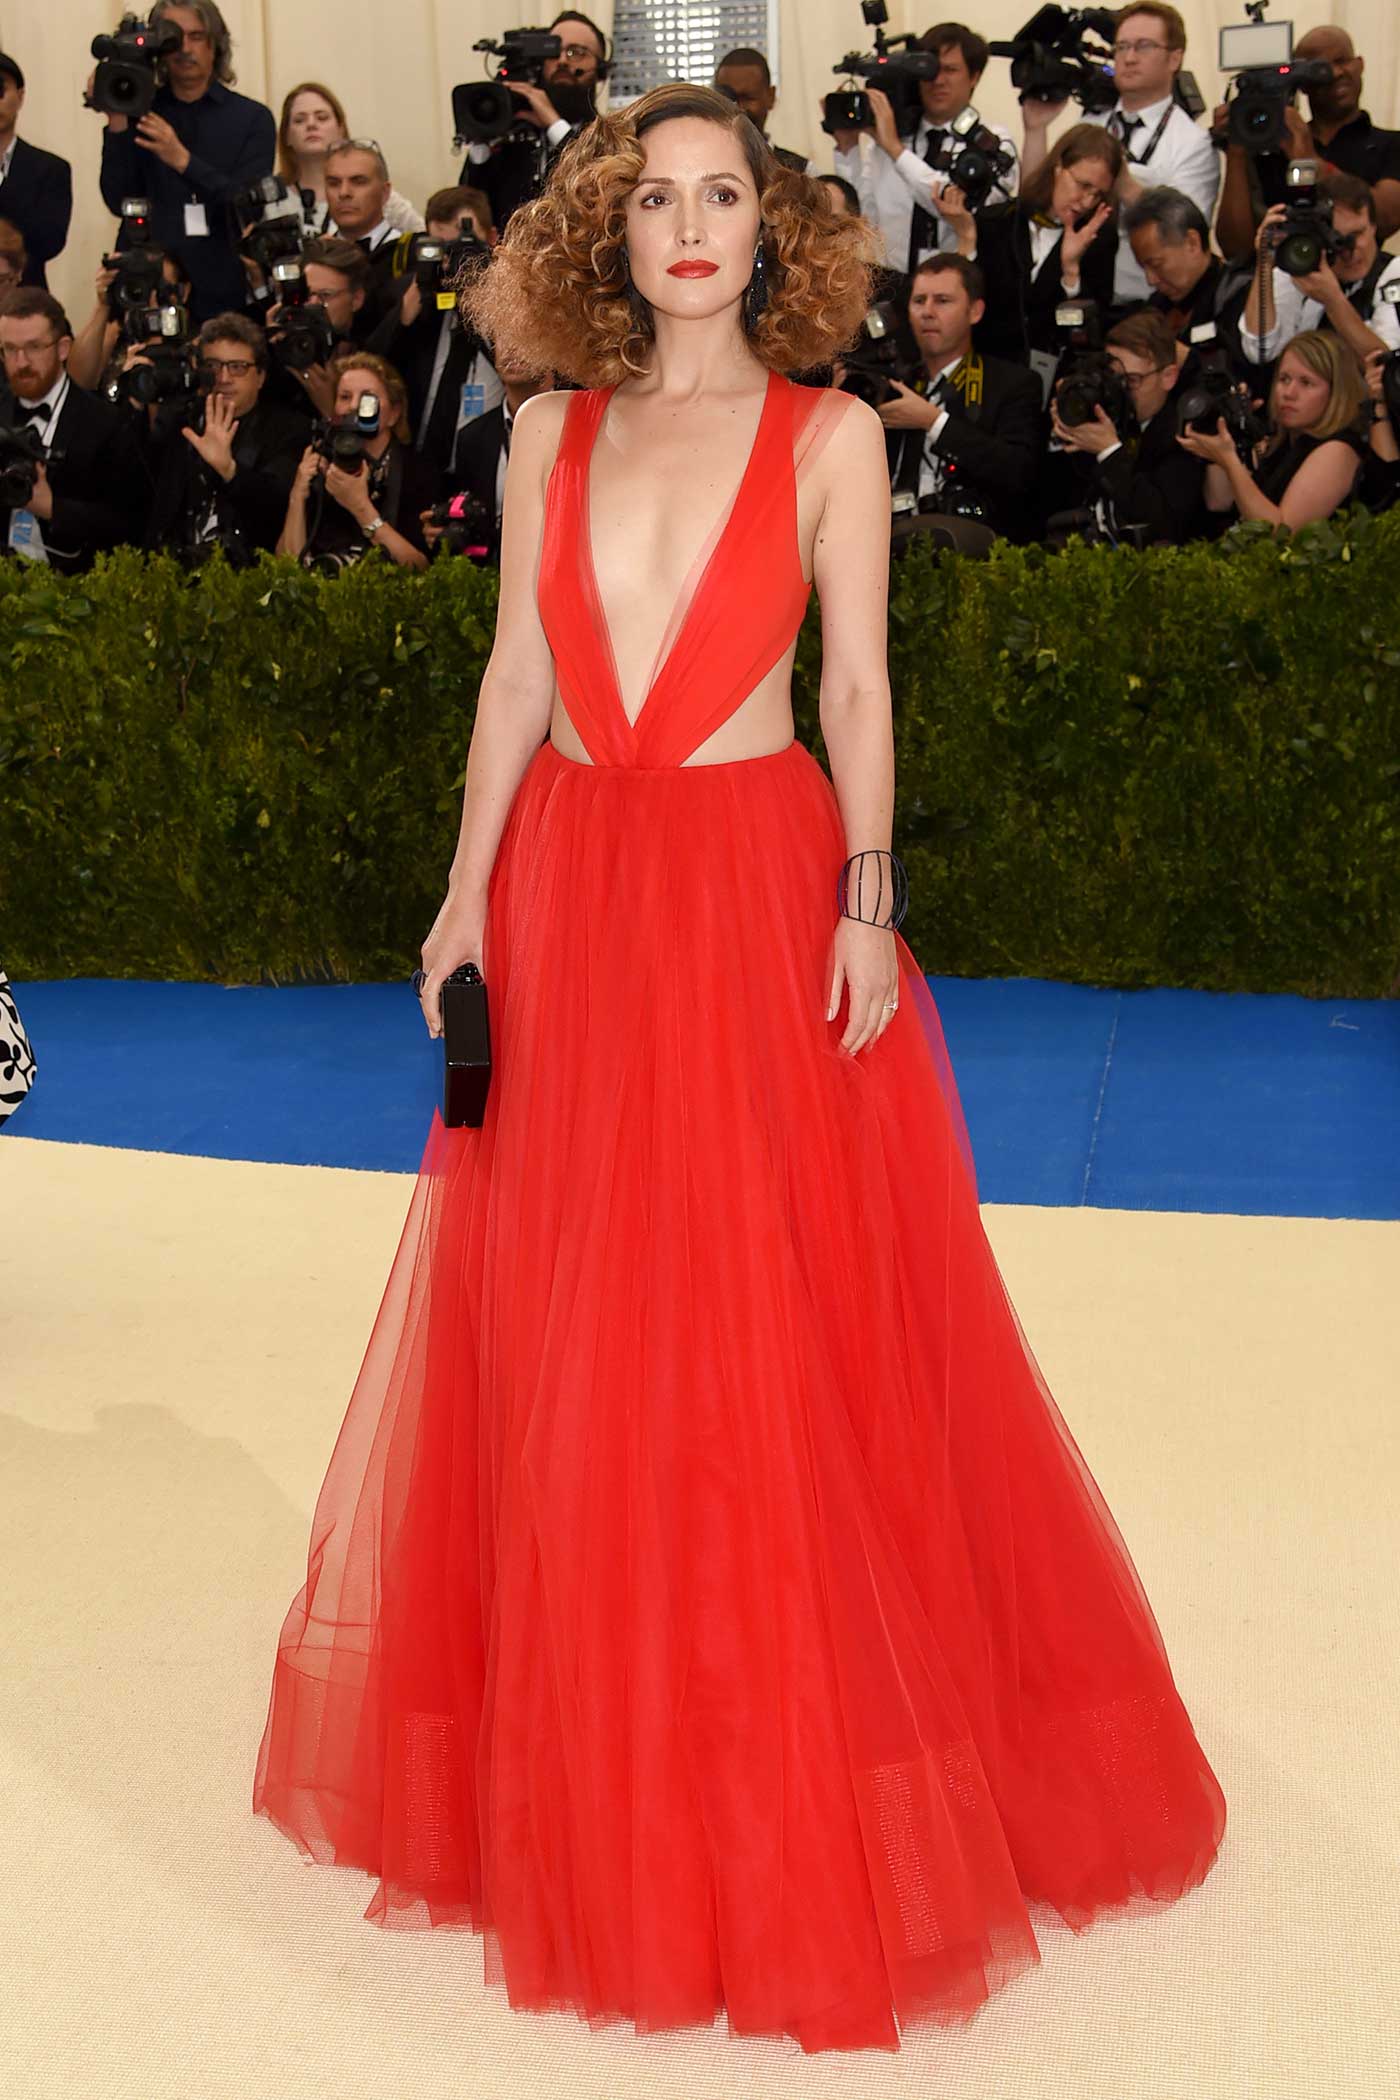 Rose Byrne wore a custom Ralph Lauren Collection bodysuit and tulle skirt